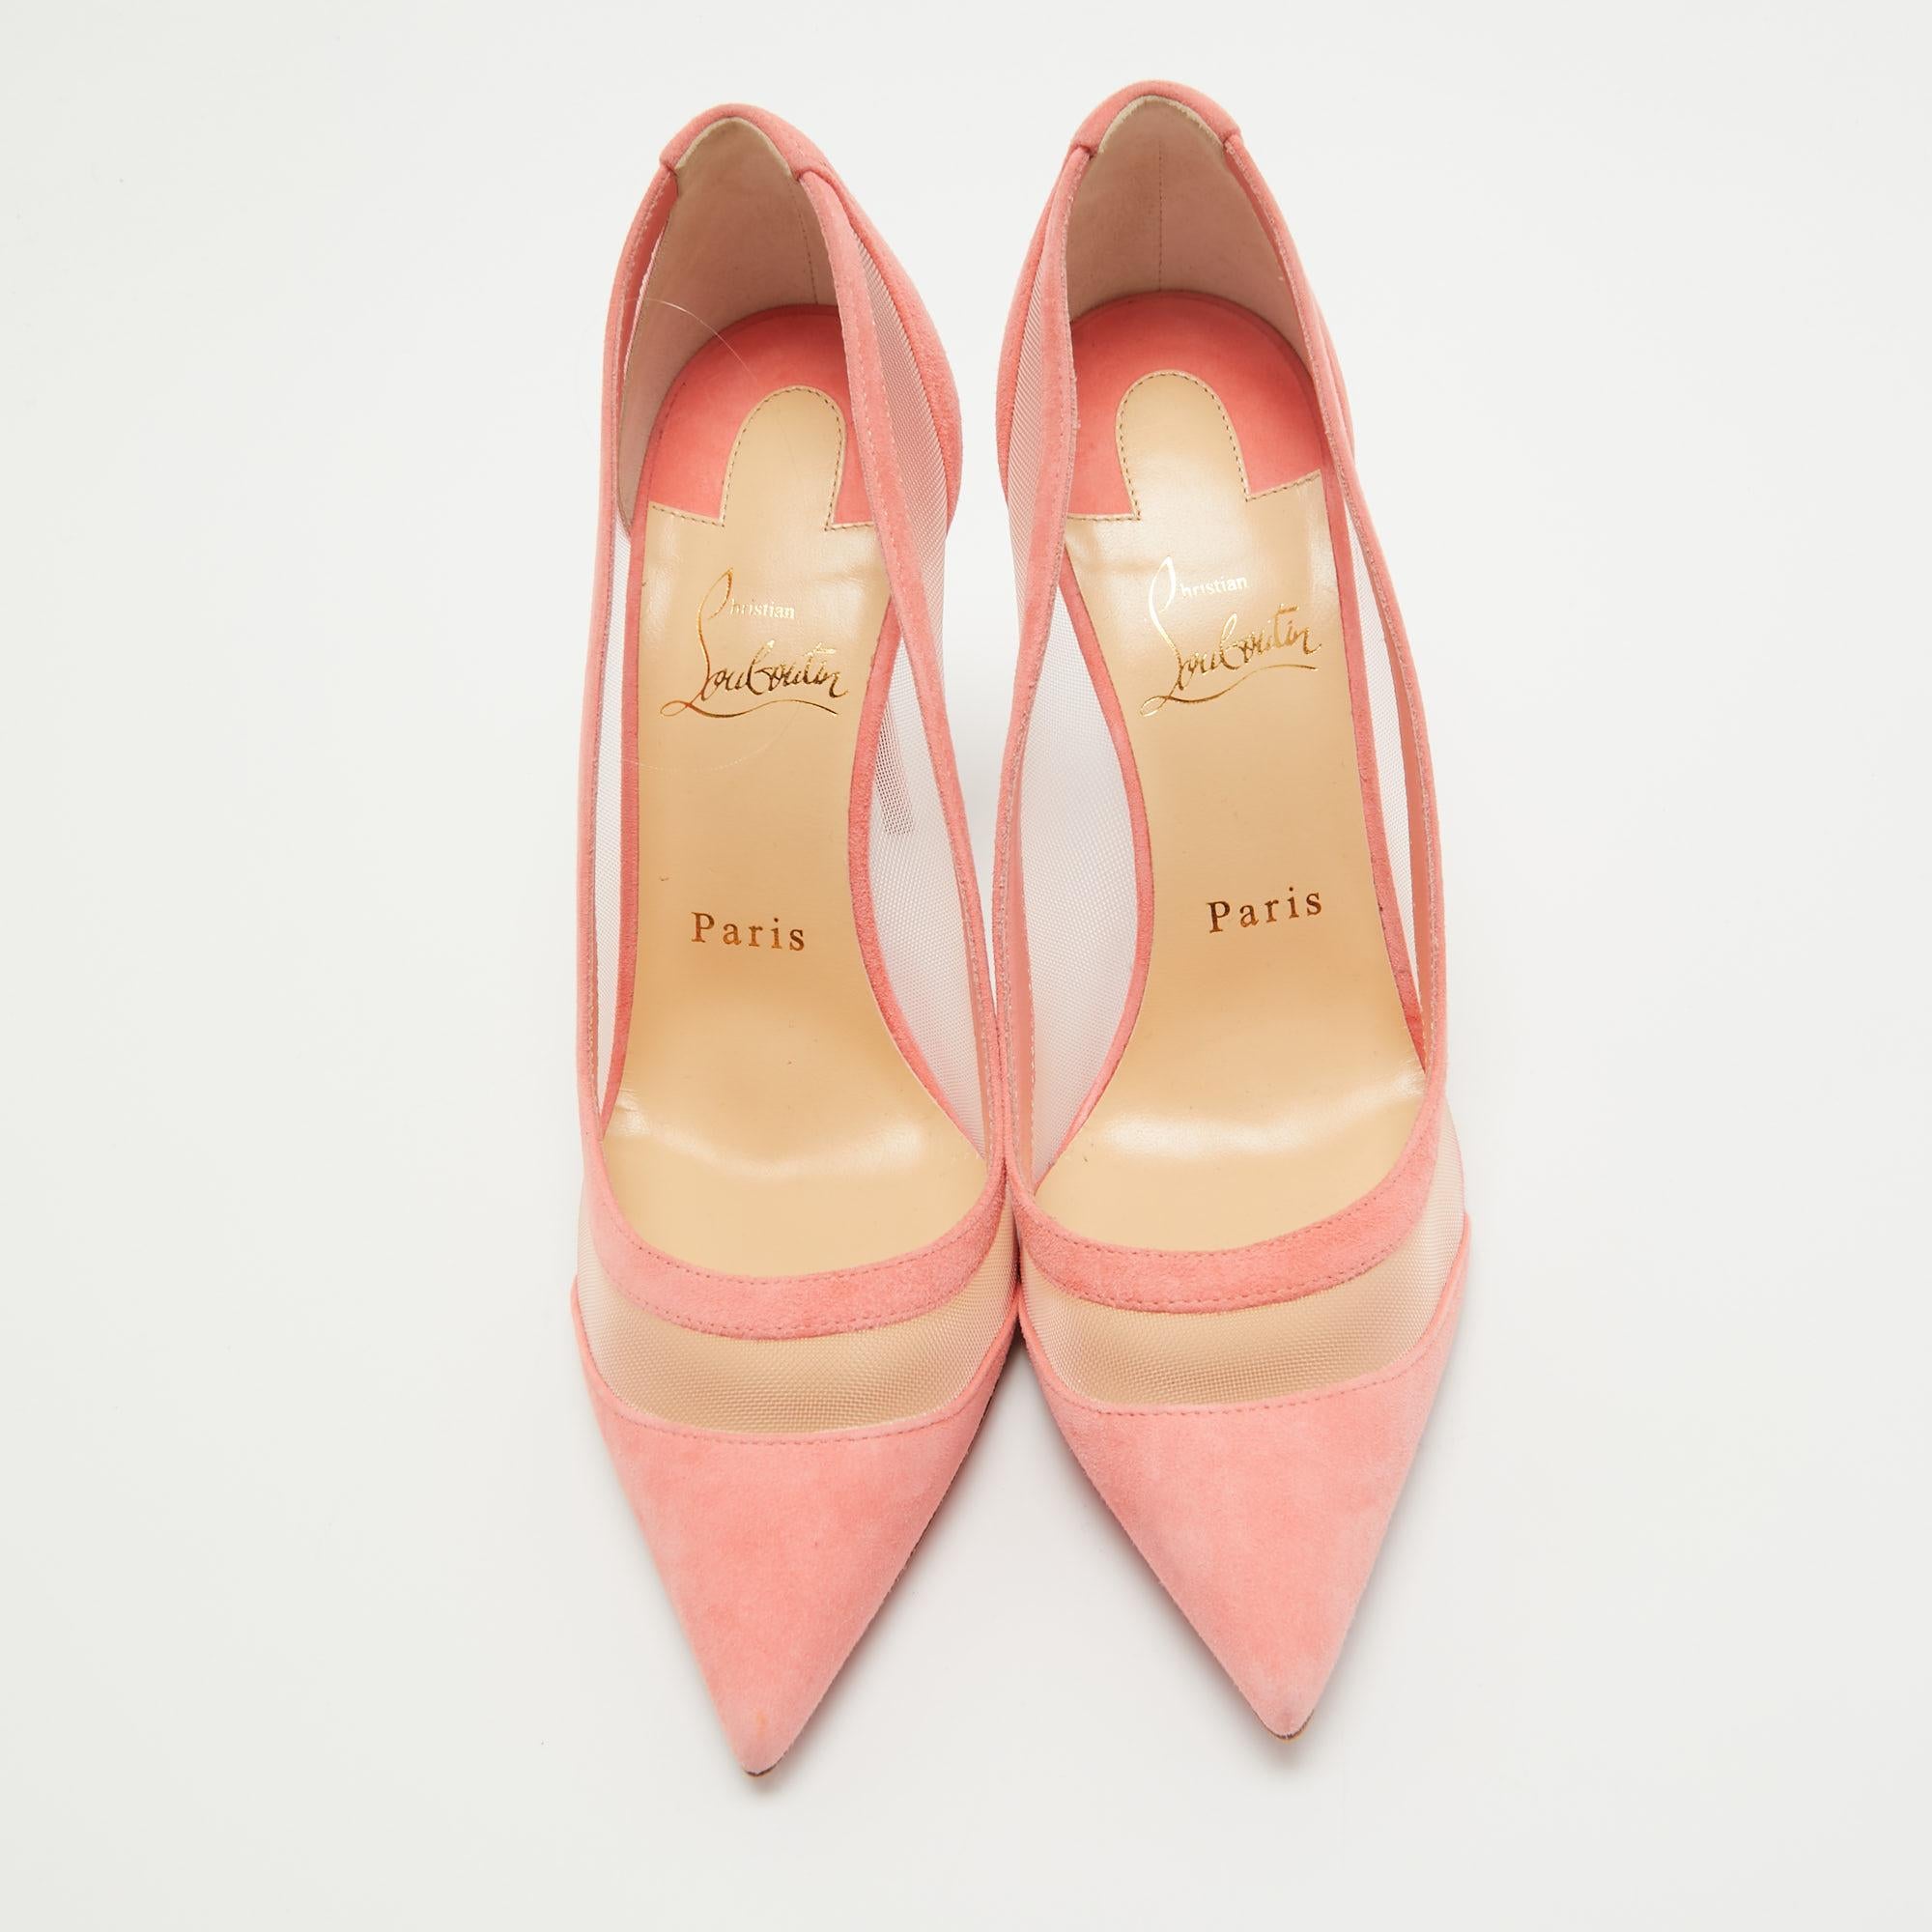 Women's Christian Louboutin Pink Suede and Mesh Galativi Pumps Size 38.5 For Sale